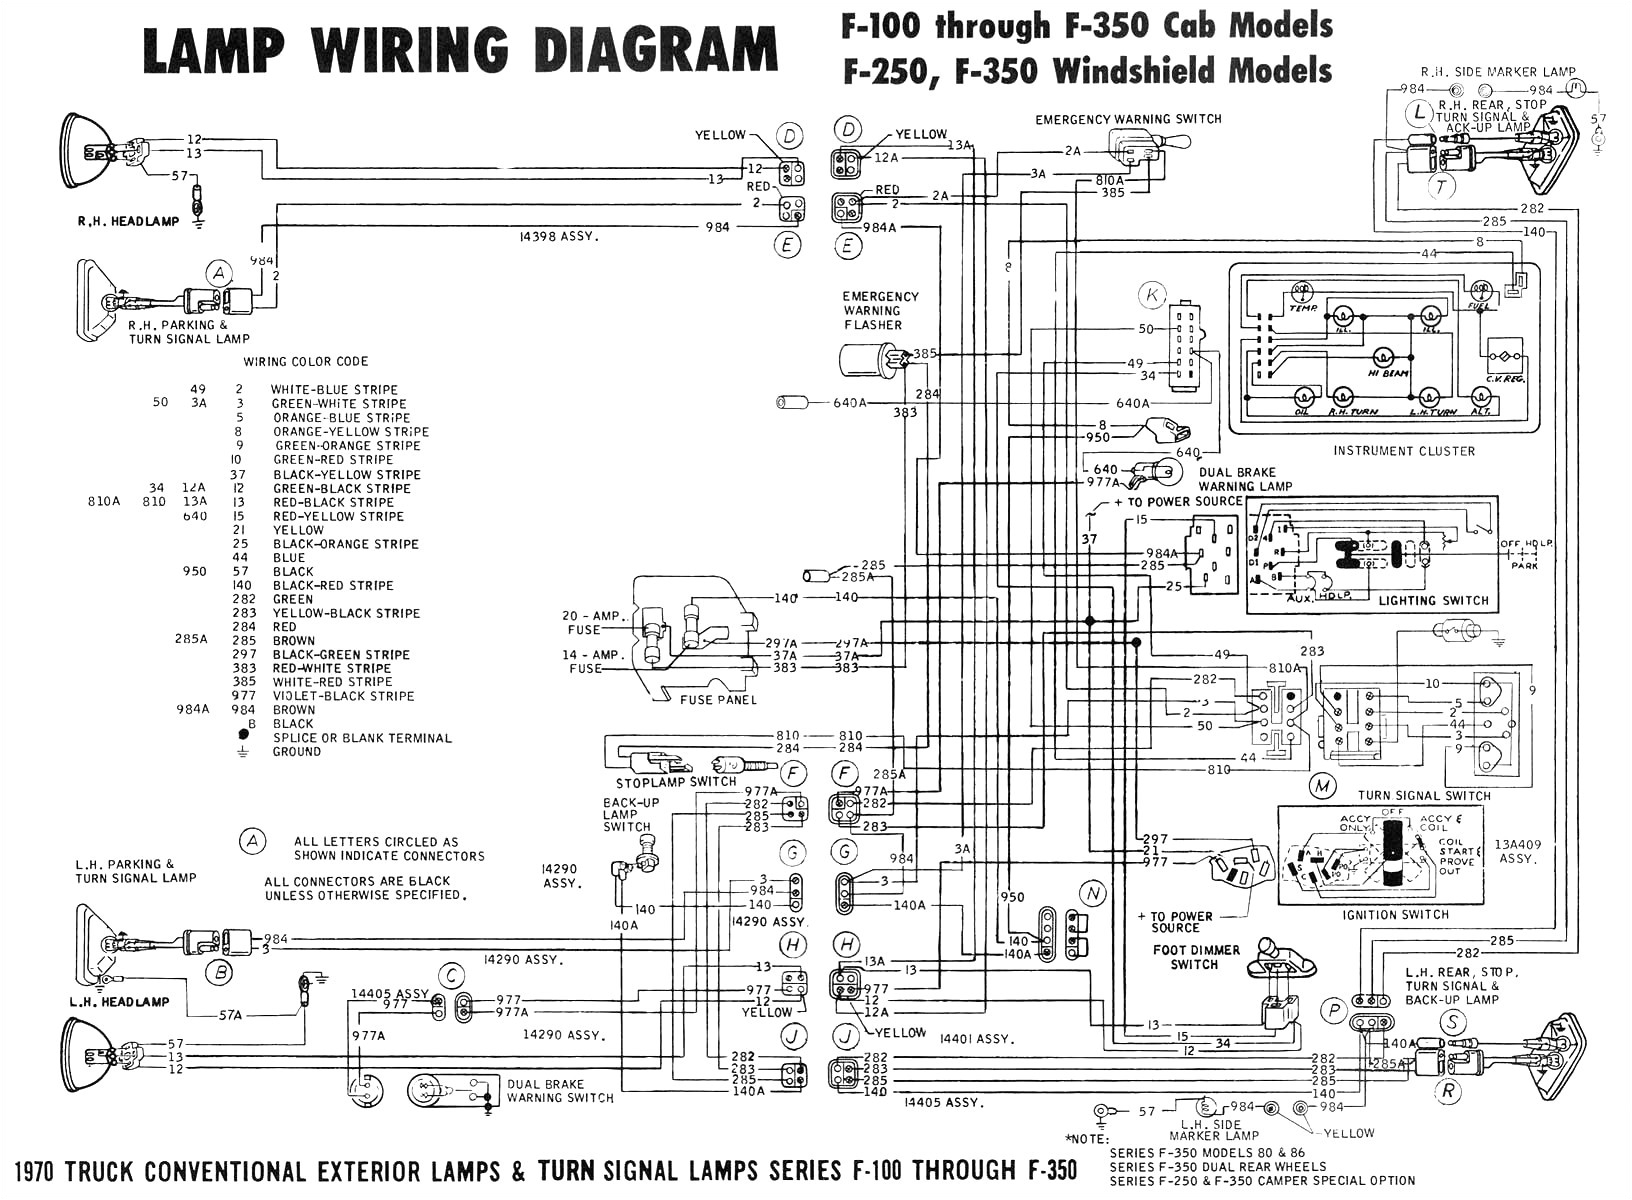 wiring diagram furthermore 1996 ford explorer power window wiring diagram furthermore 2004 ford explorer power window